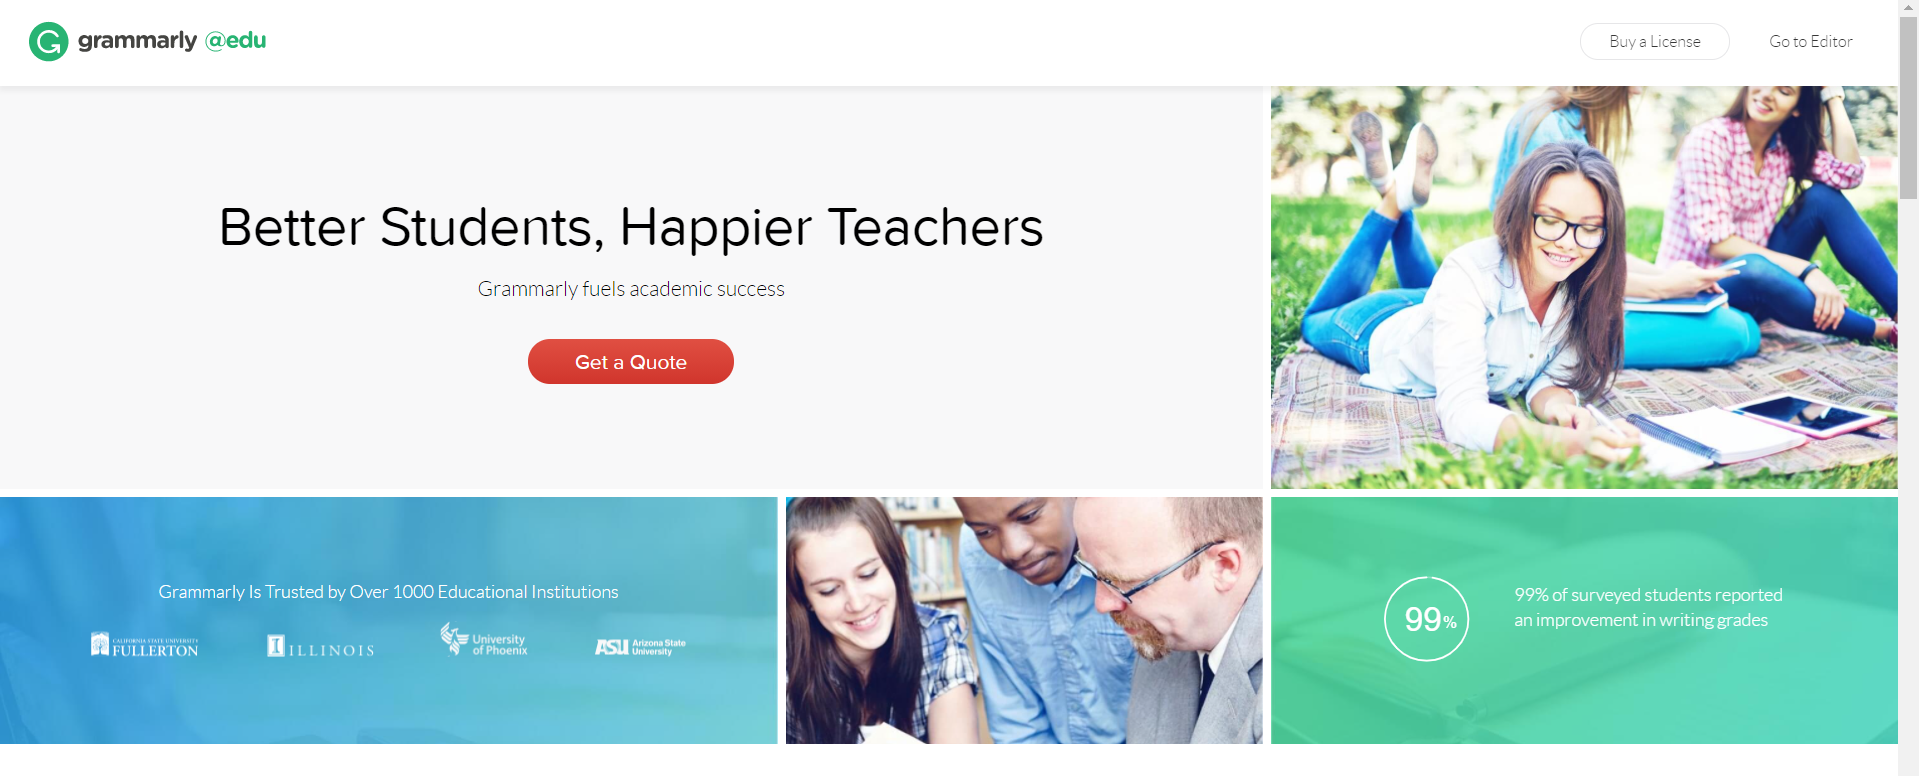 Grammarly@edu sign-up page